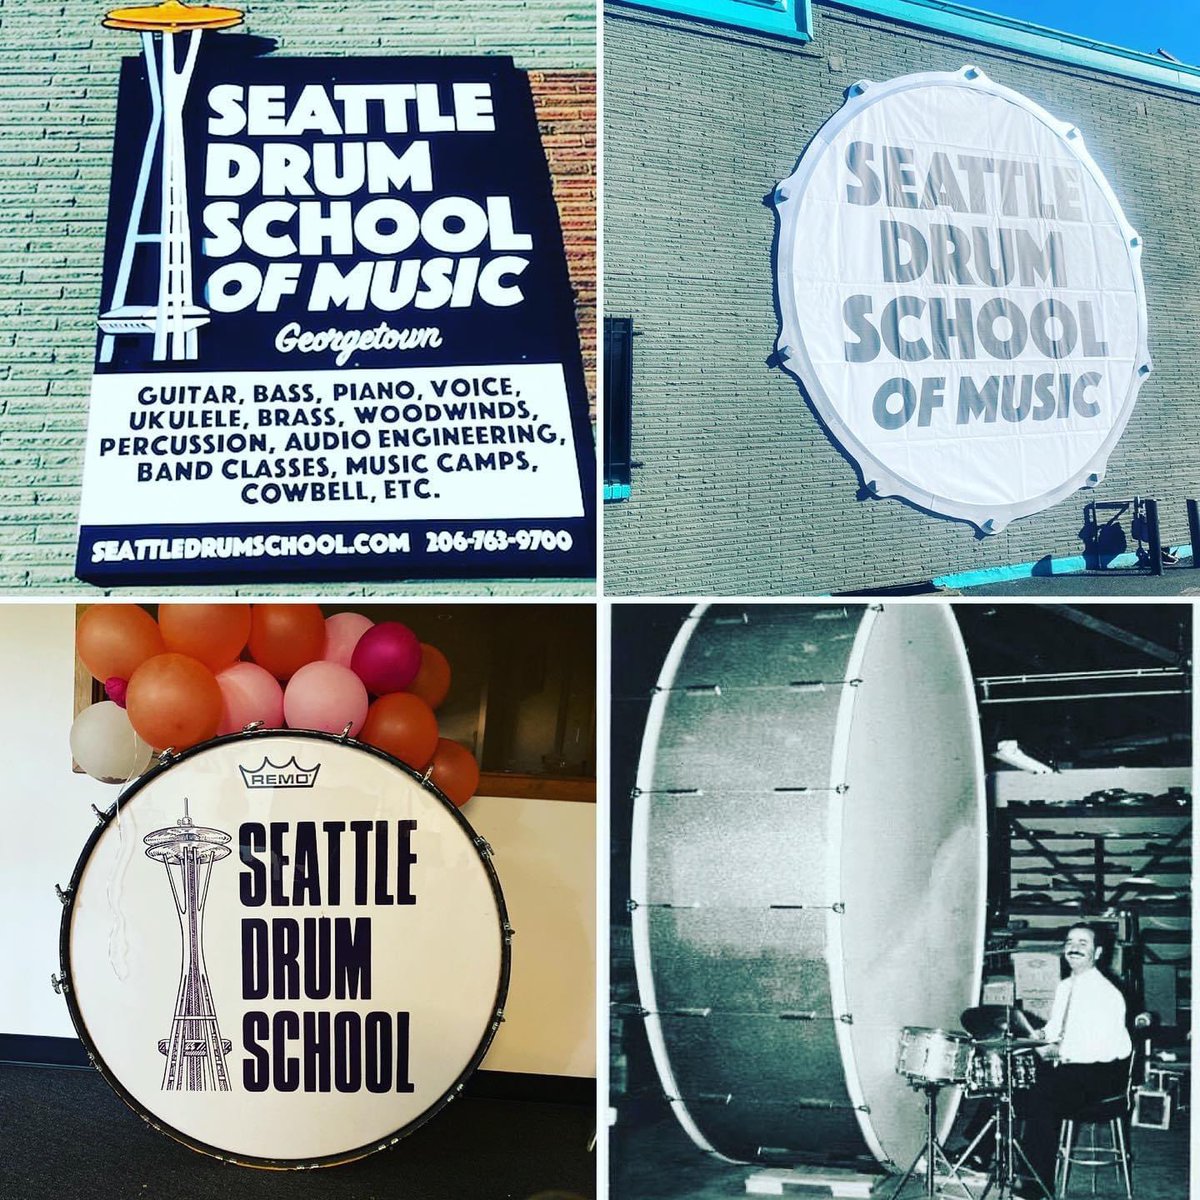 BIGGER DRUMS?!?
Okay!🥁🎶😄
SeattleDrumSchool.com
Family owned since 1986
#Seattle #musicschool #guitar #bass #piano #voicelessons #ukulele #brass #woodwinds #percussion #audioengineering #bandclass #musiccamp #cowbell and #drums #duh